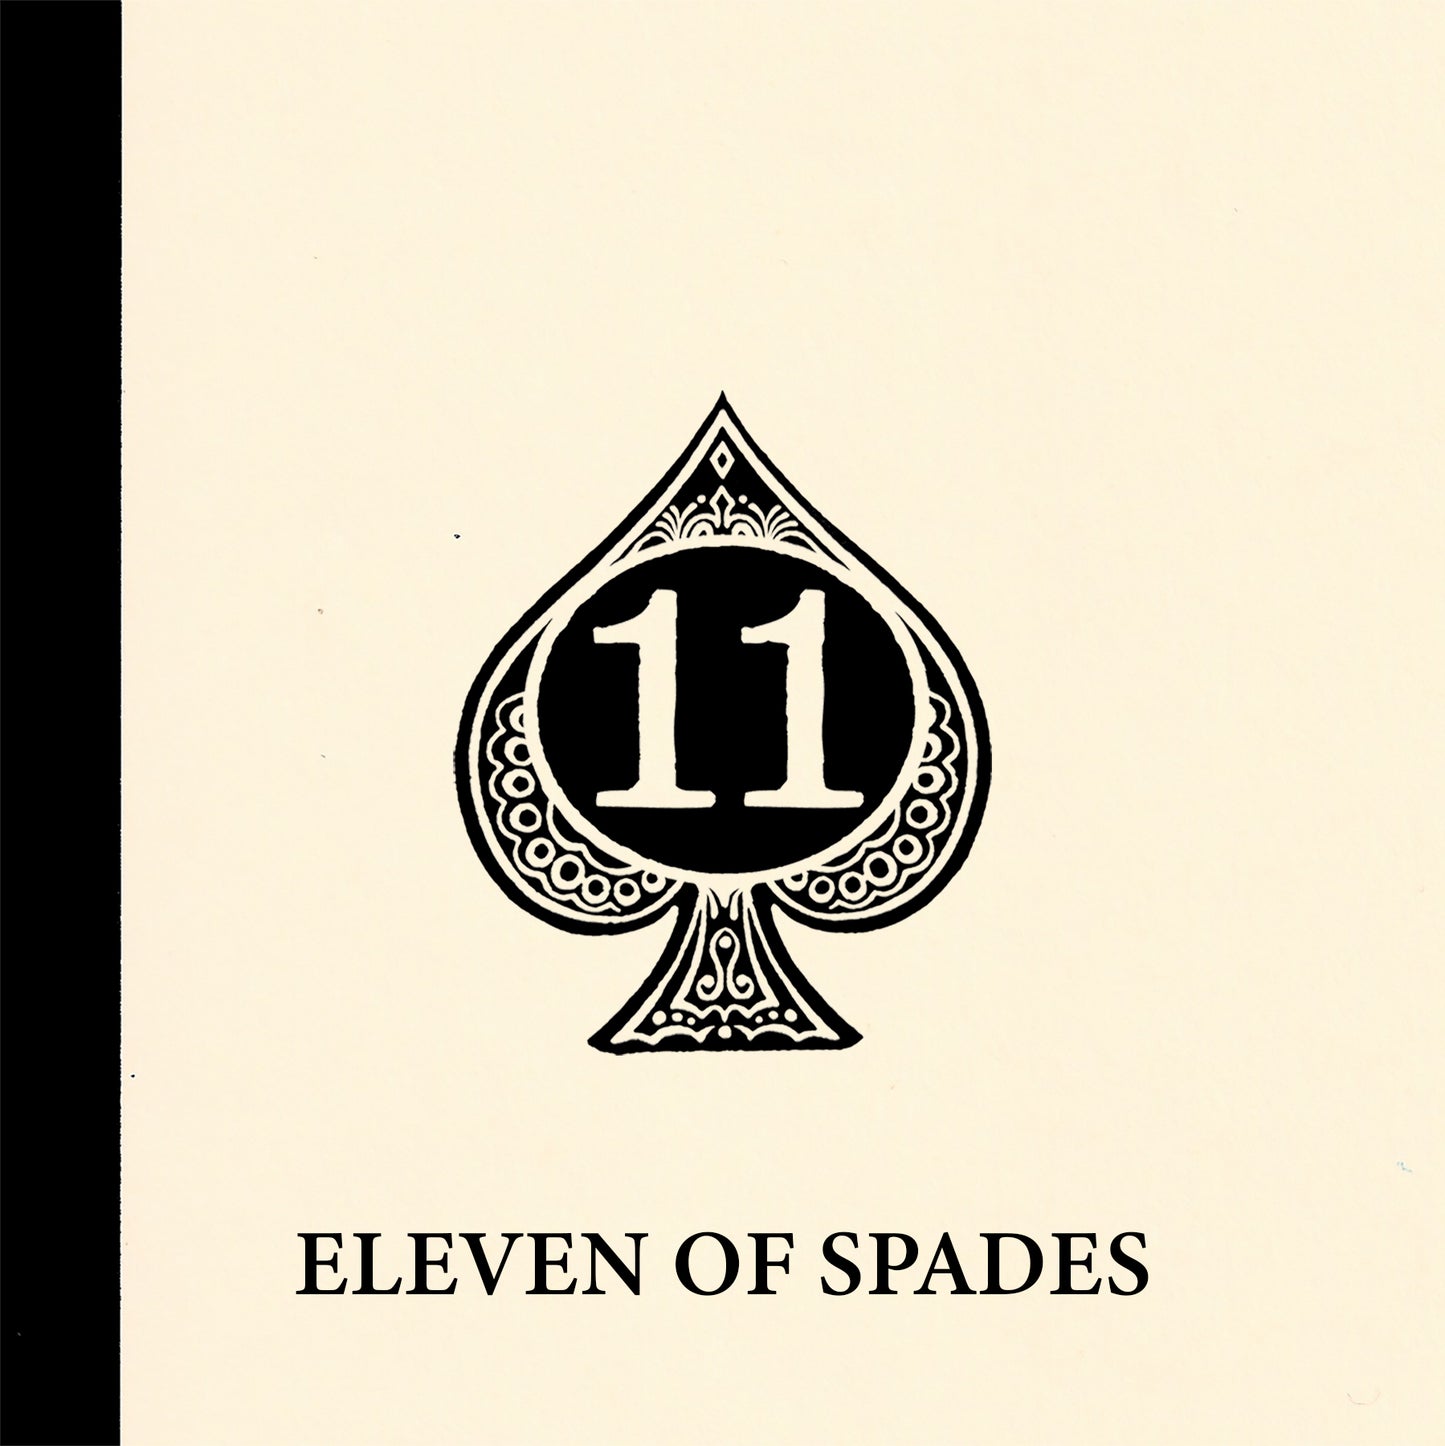 Eleven of Spades